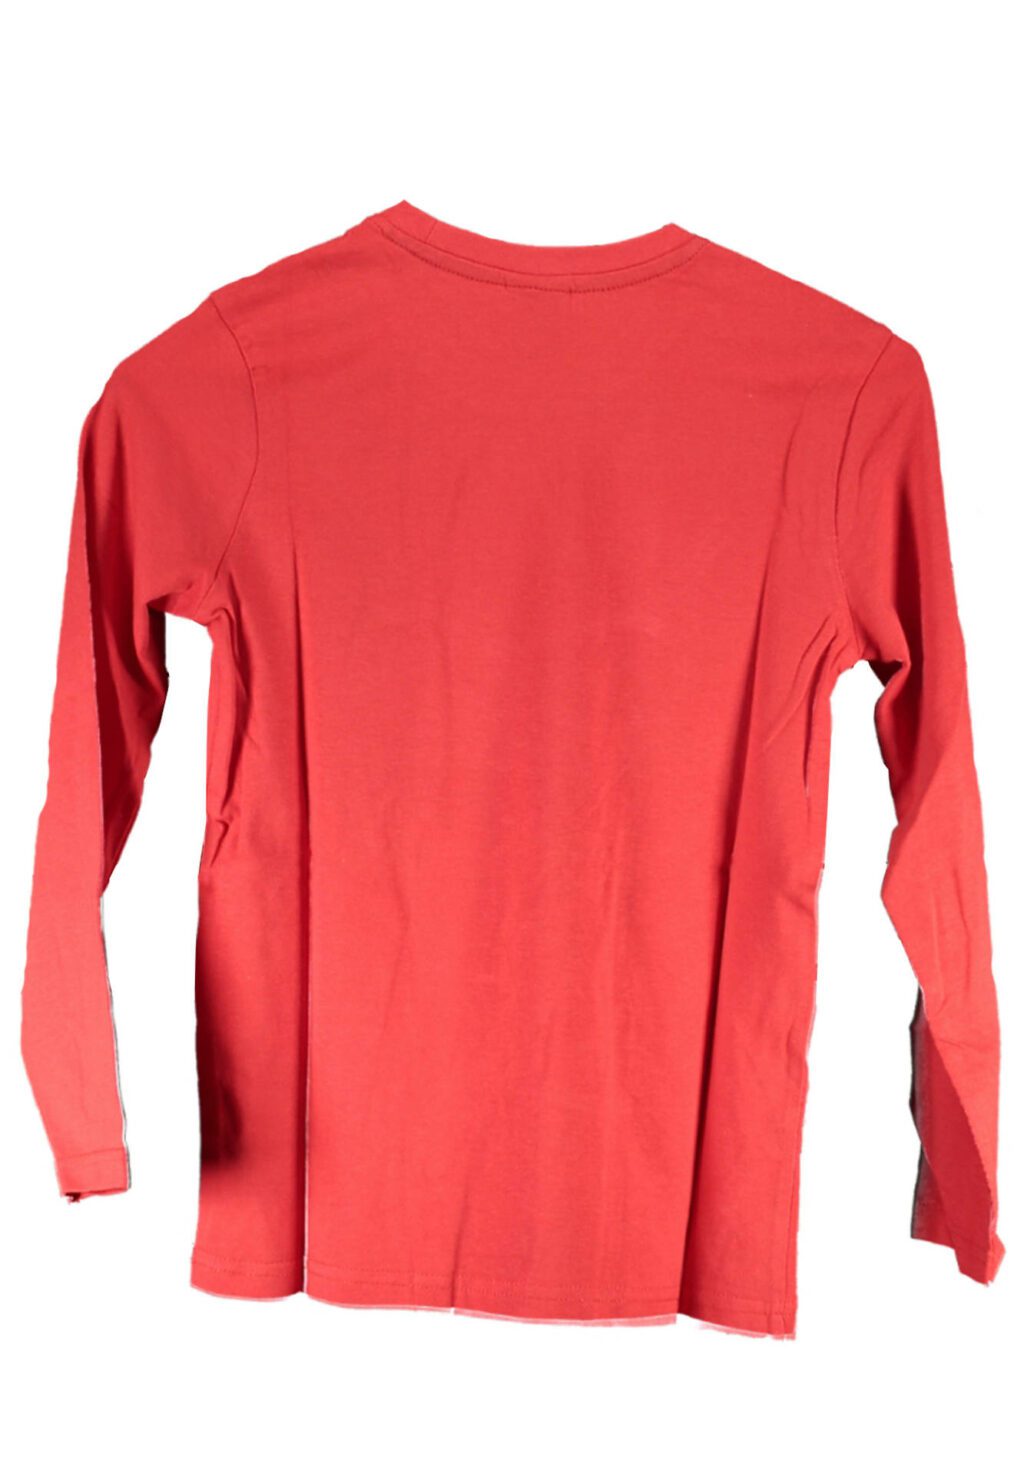 NORTH SAILS RED KIDS LONG SLEEVED T-SHIRT 902484-000_ROSSO_0236